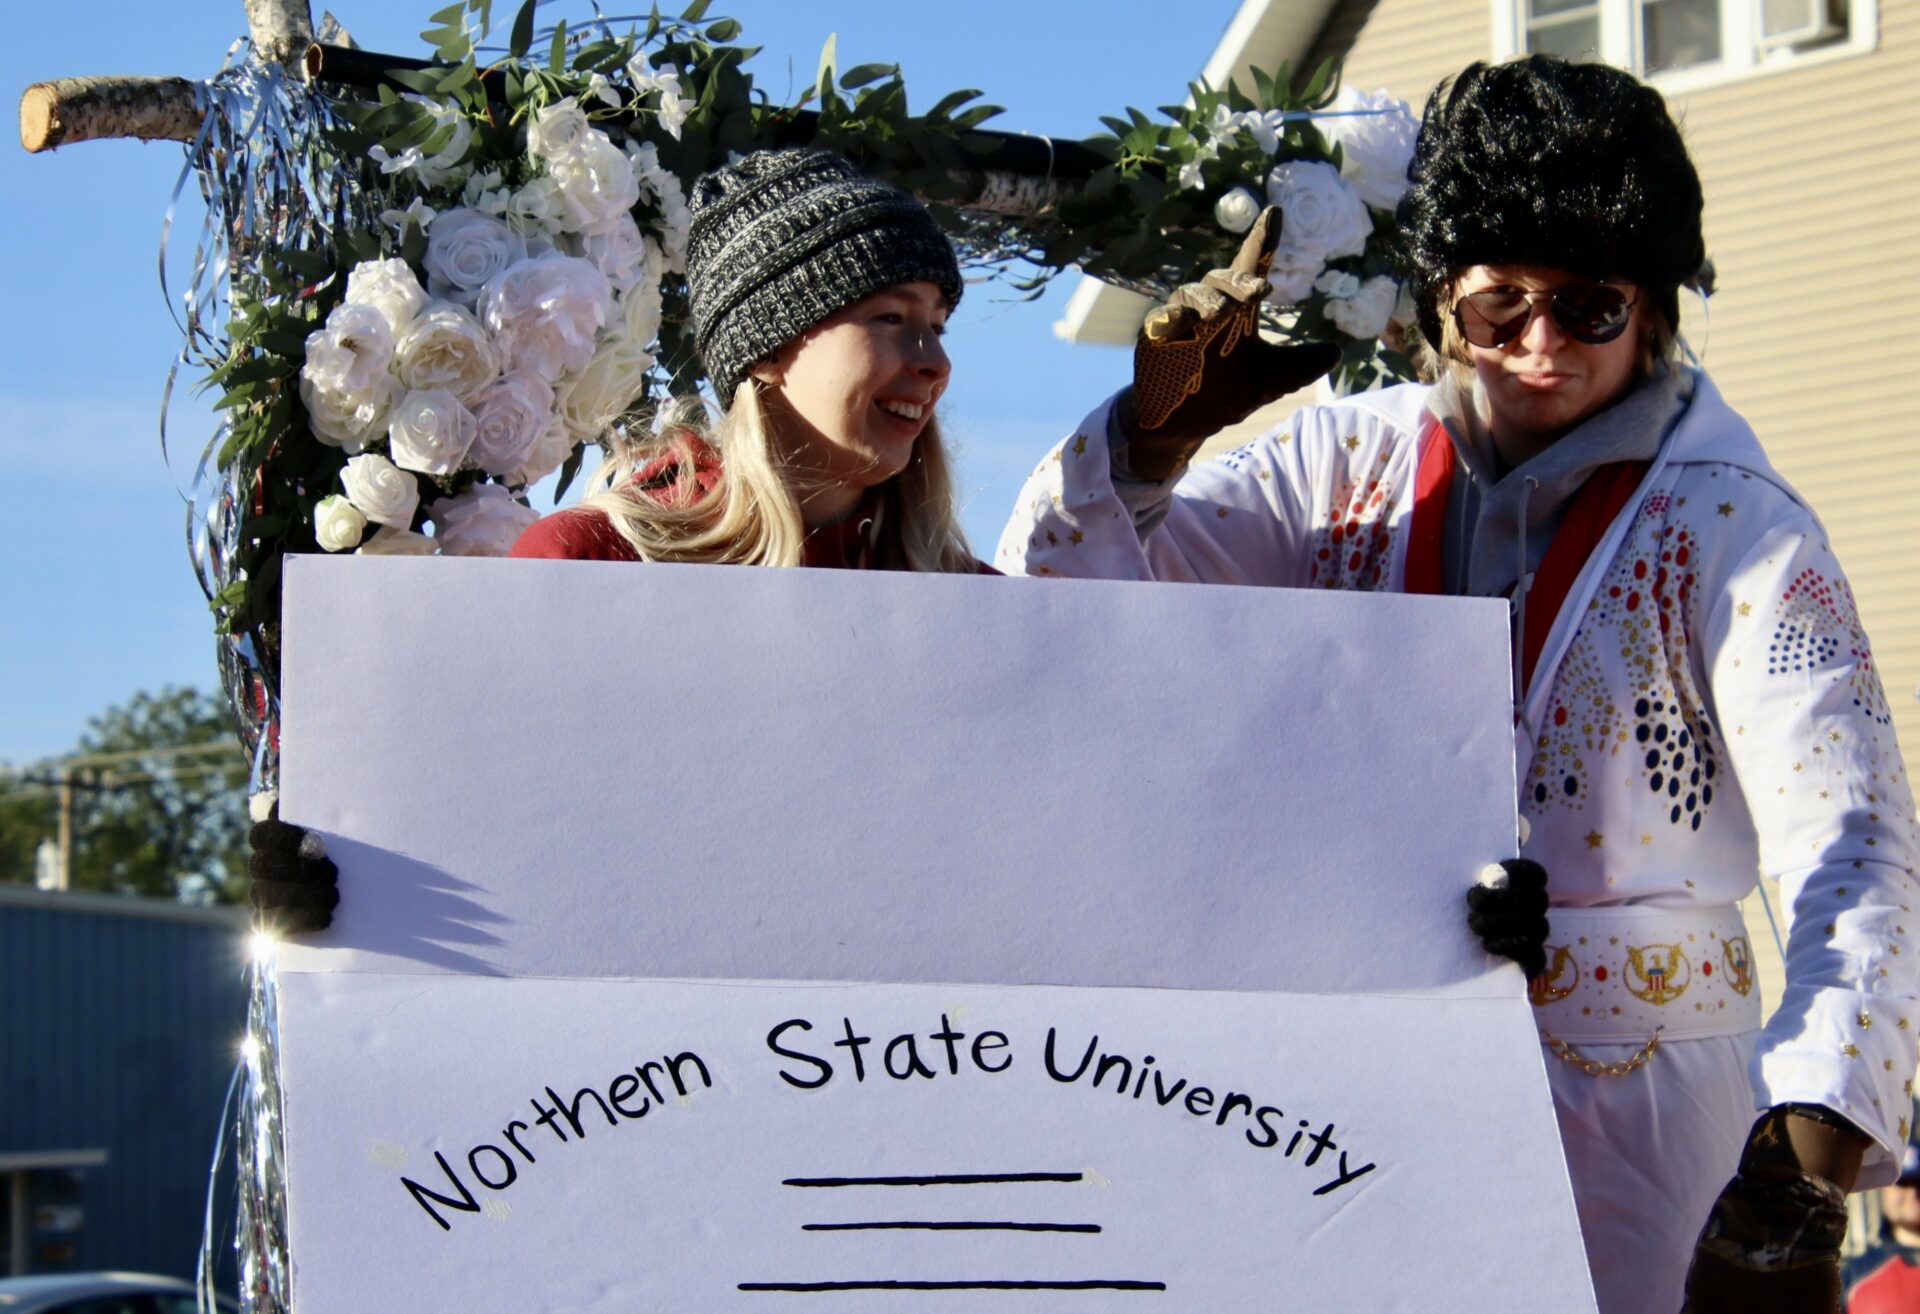 Wolves go to Vegas was the theme of the 2023 Northern State University homecoming parade on Saturday, Oct. 7. Elvis sightings were reported. Aberdeen Insider photo by Scott Waltman